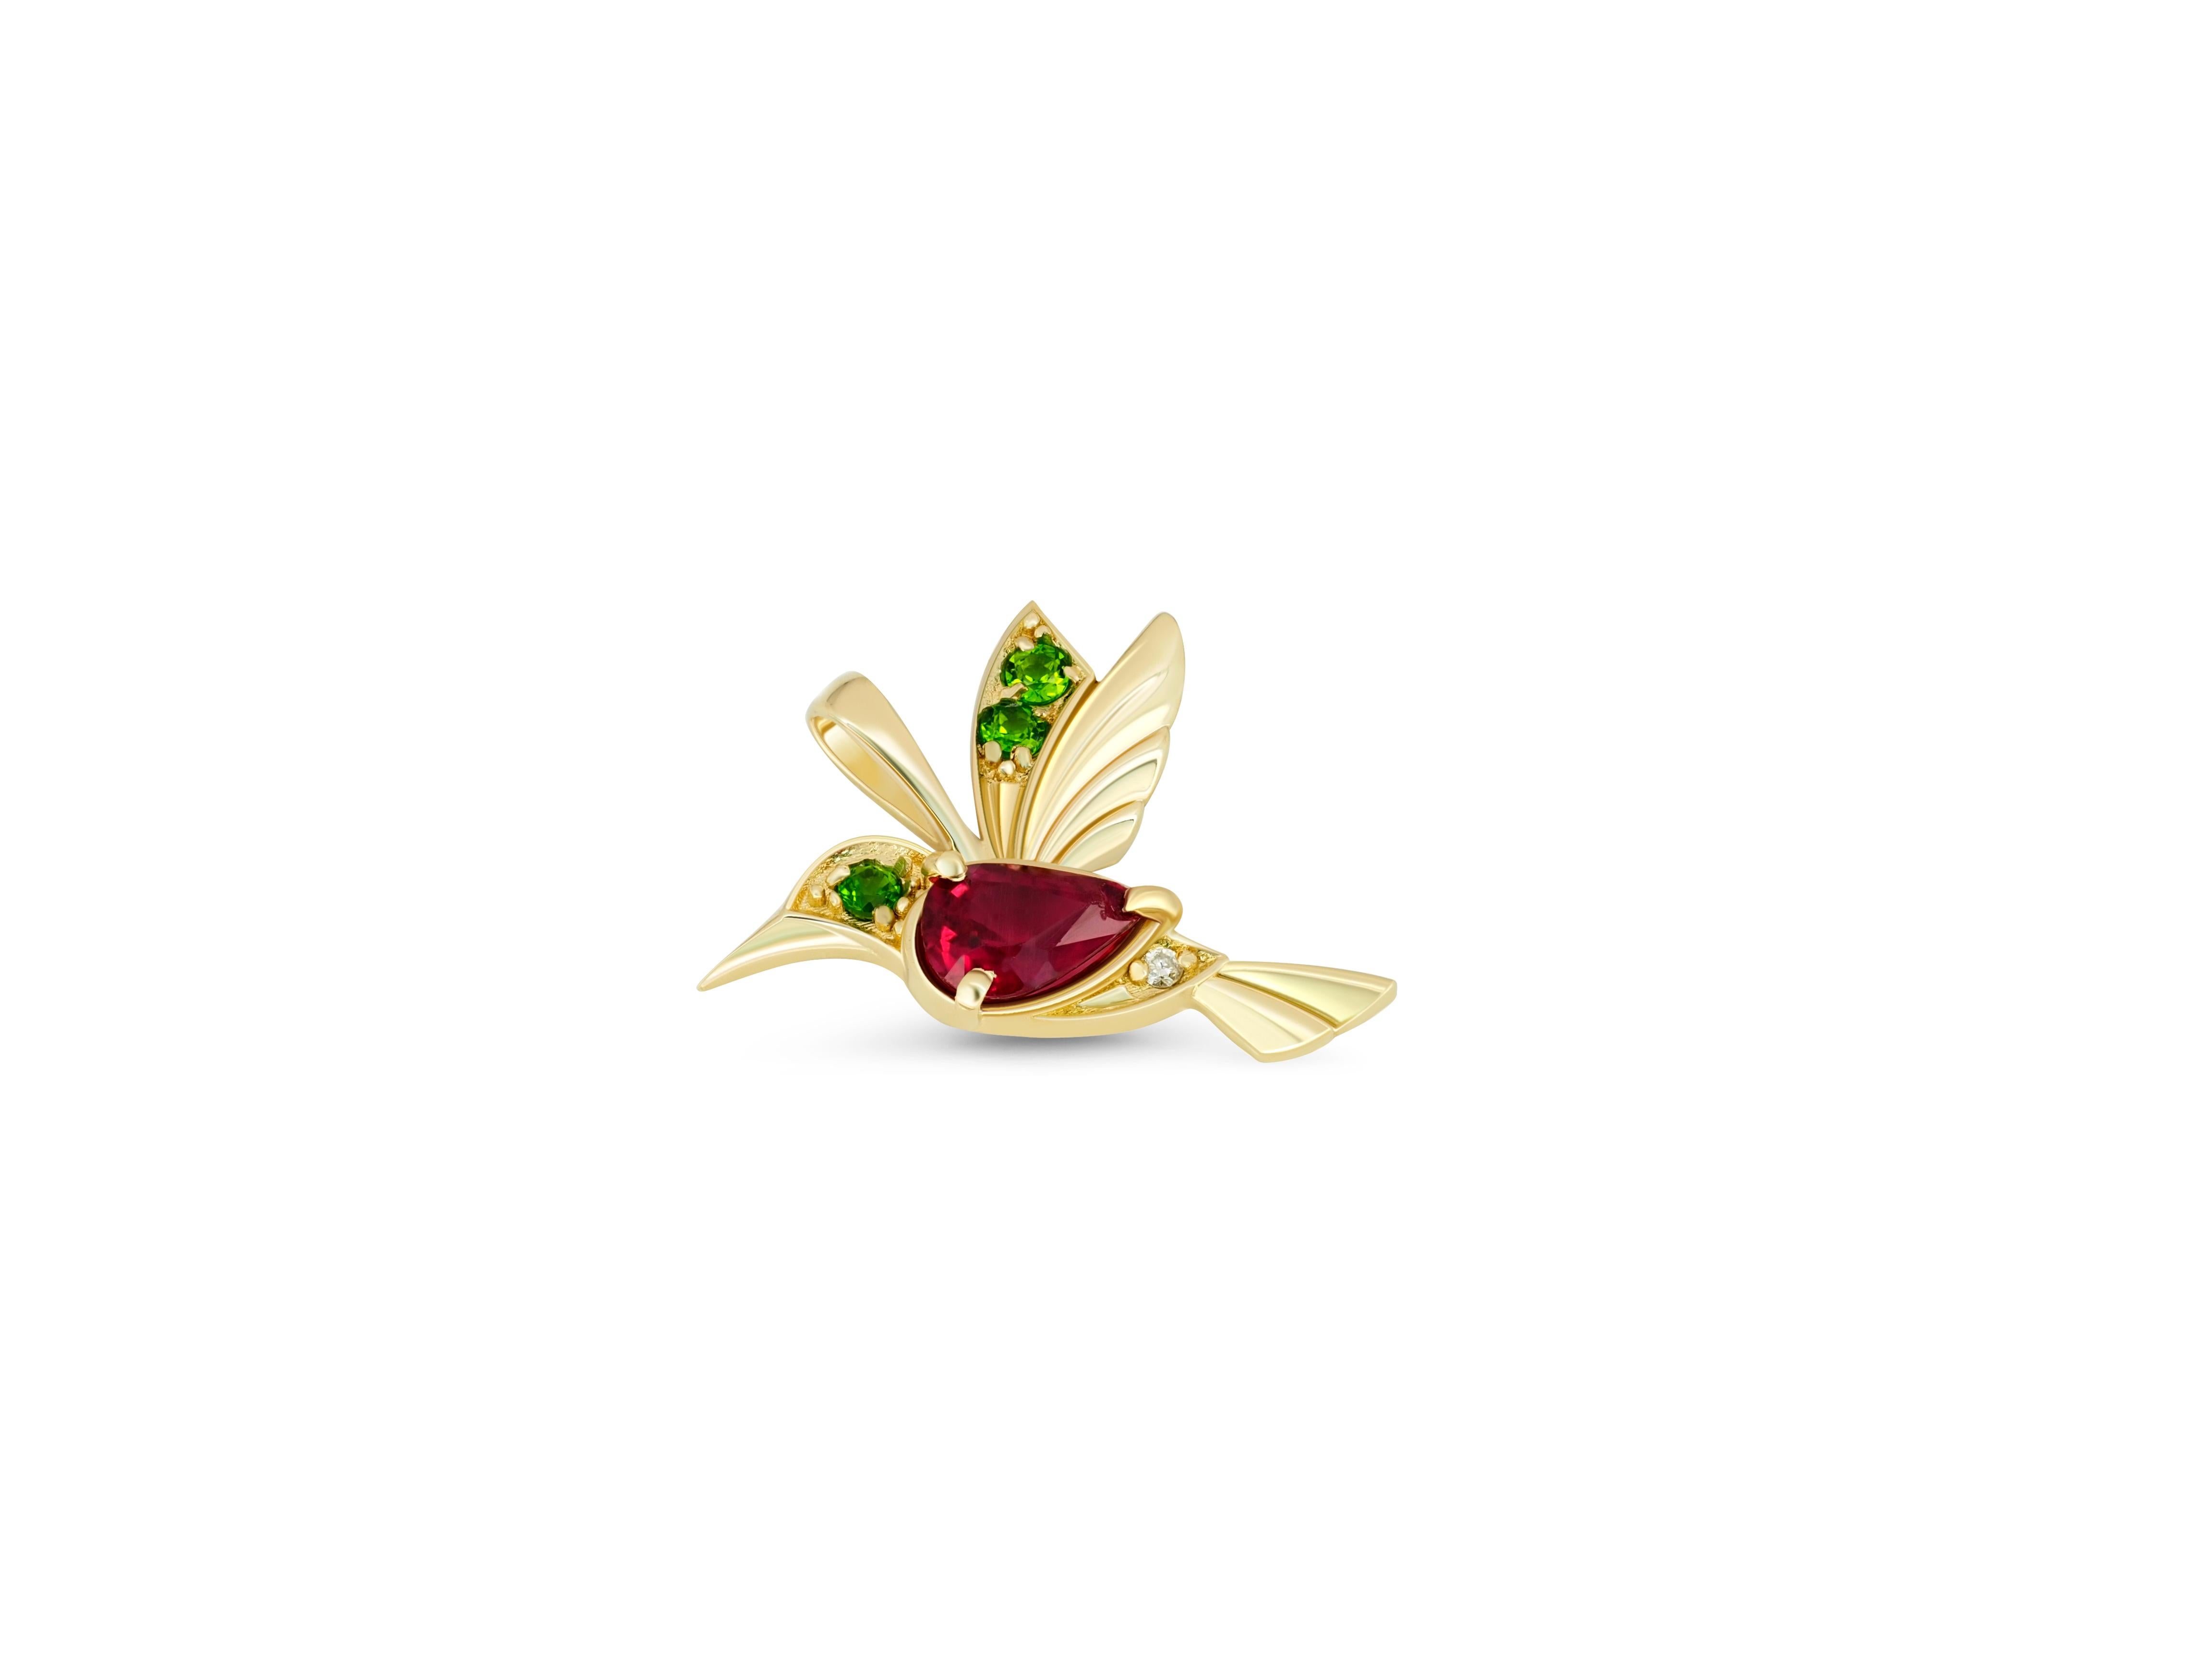 14k Gold Hummingbird Pendant with Rubies. Bird  Pendant with colored gemstones.
14 kt gold bird pendant with ruby, tsavorites and diamond.

Weight: 0.9 g.
Size: 12x16.6mm
Set with ruby, color - red
pear cut, 0.7 ct. in total (6x4 mm size)
Clarity: